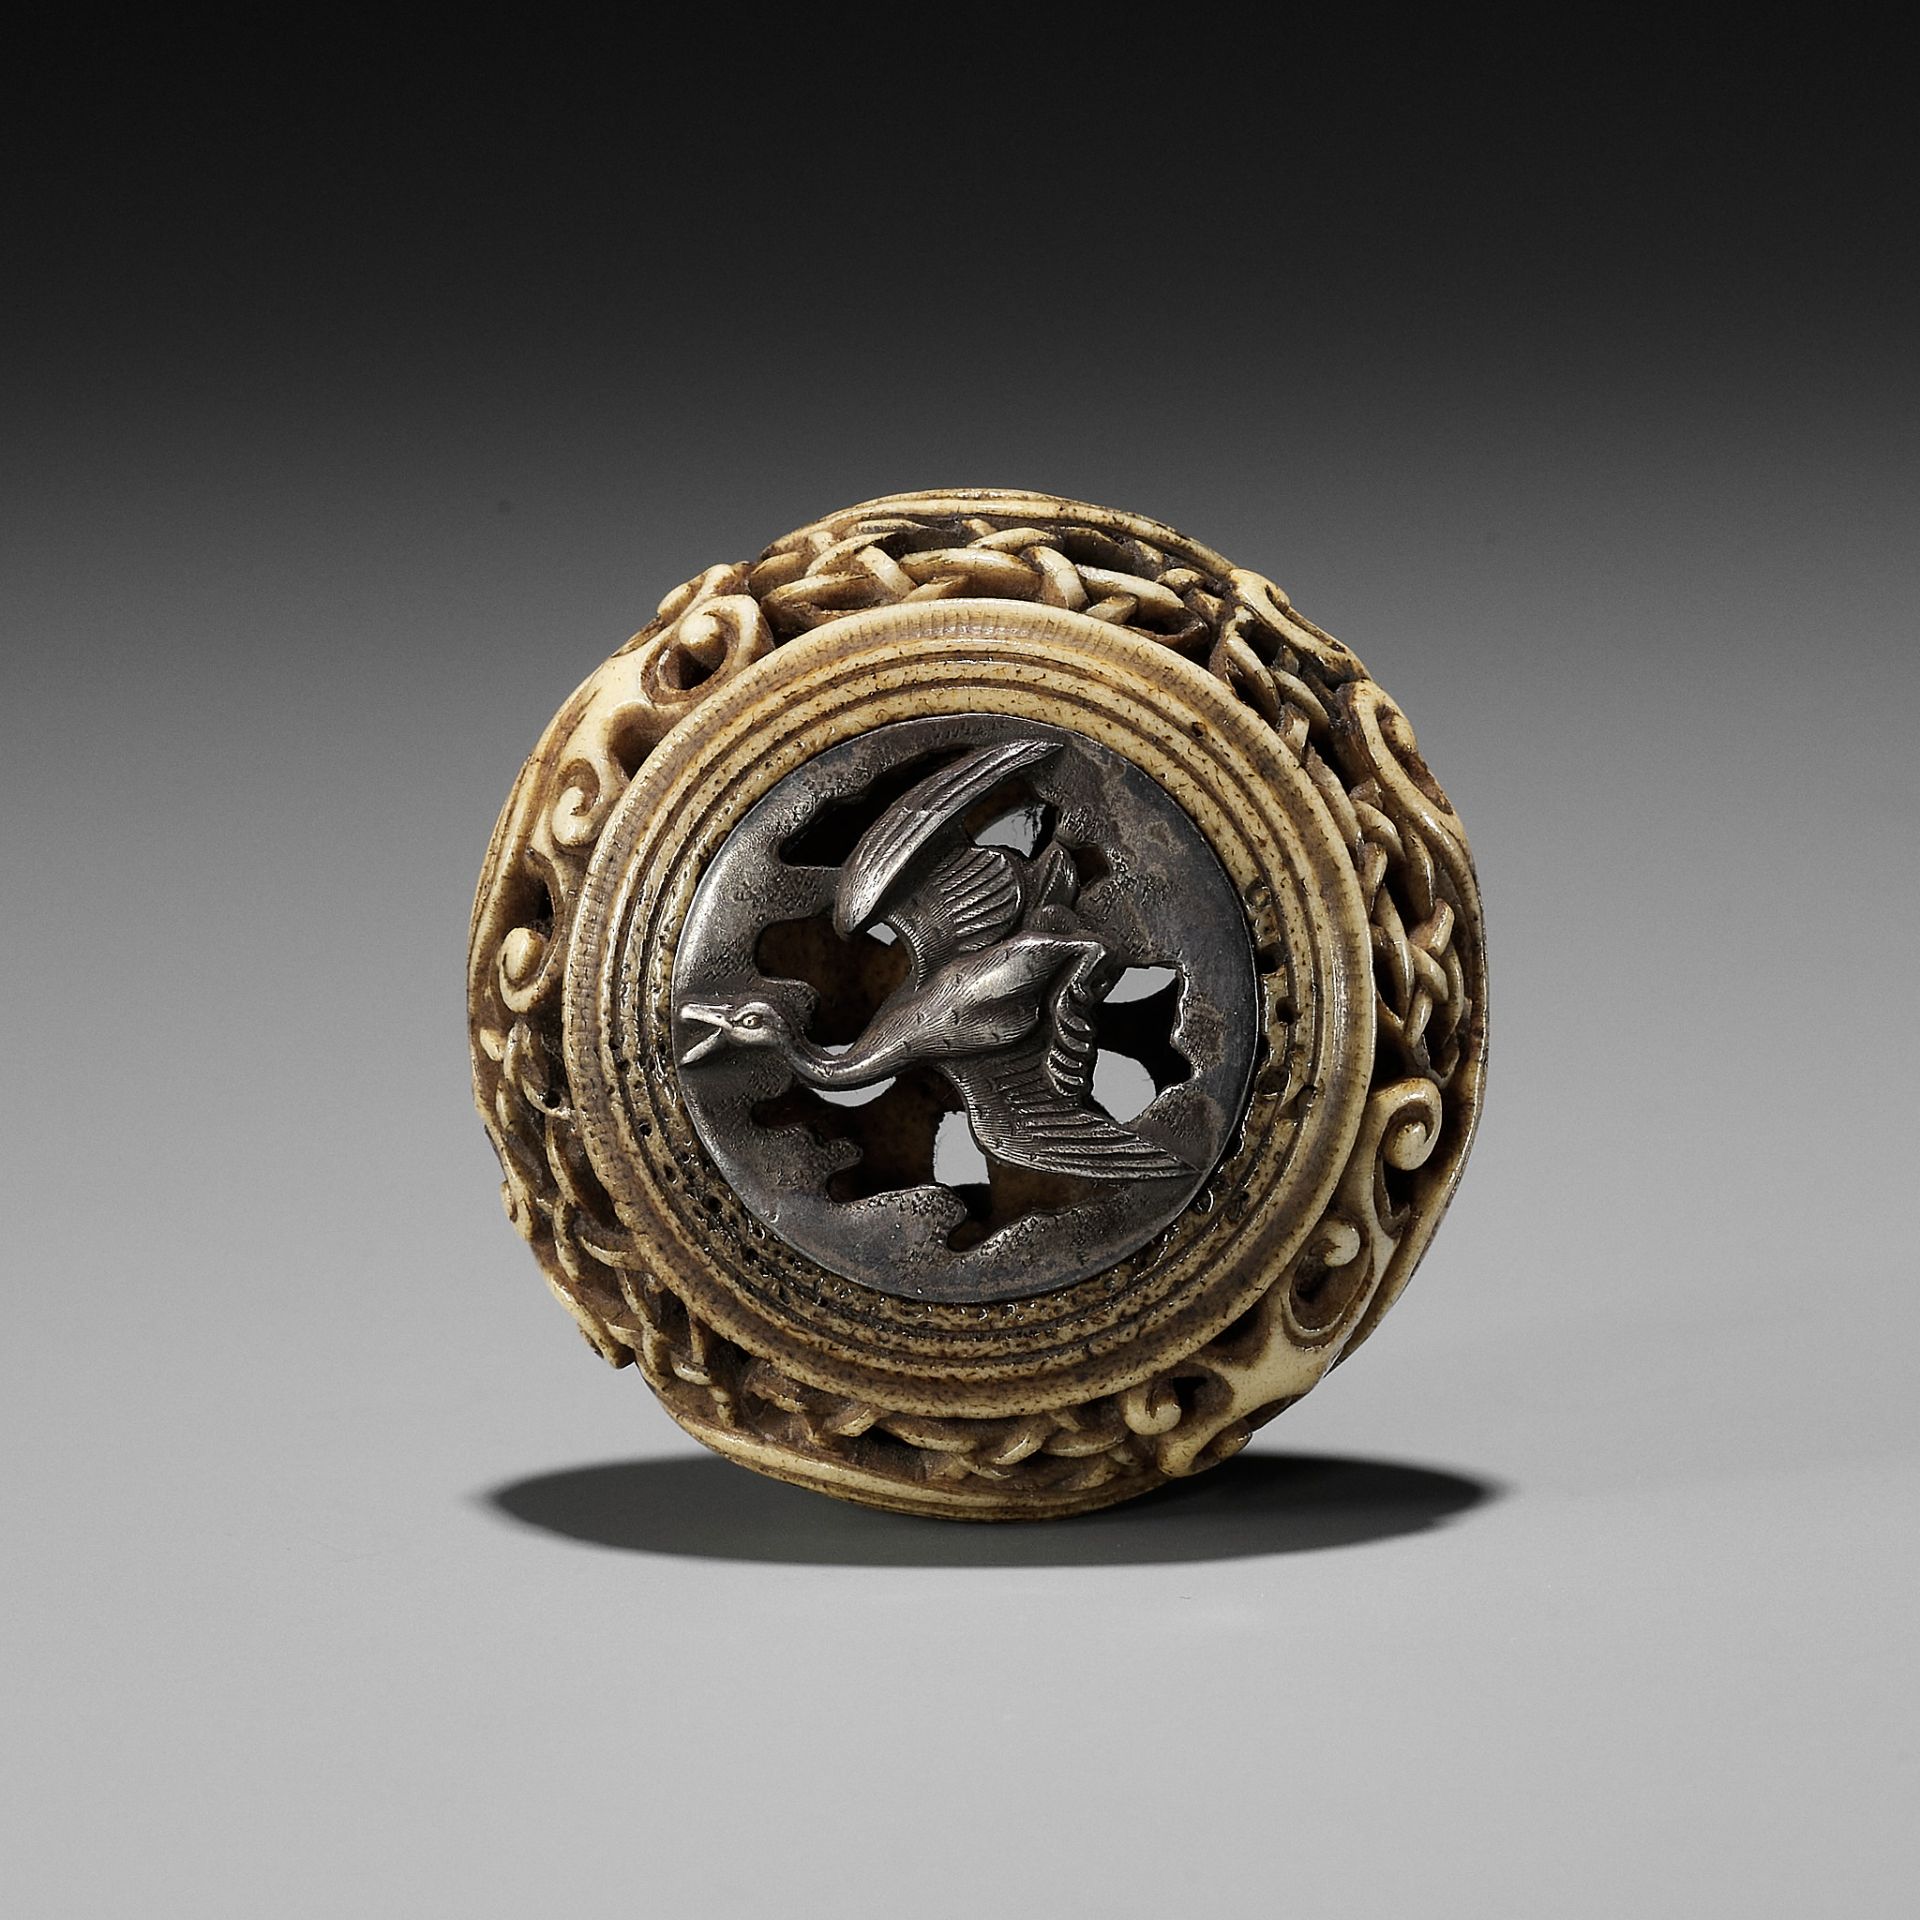 A STAG ANTLER AND SHIBUICHI KAGAMIBUTA NETSUKE DEPICTING A GOOSE IN FLIGHT